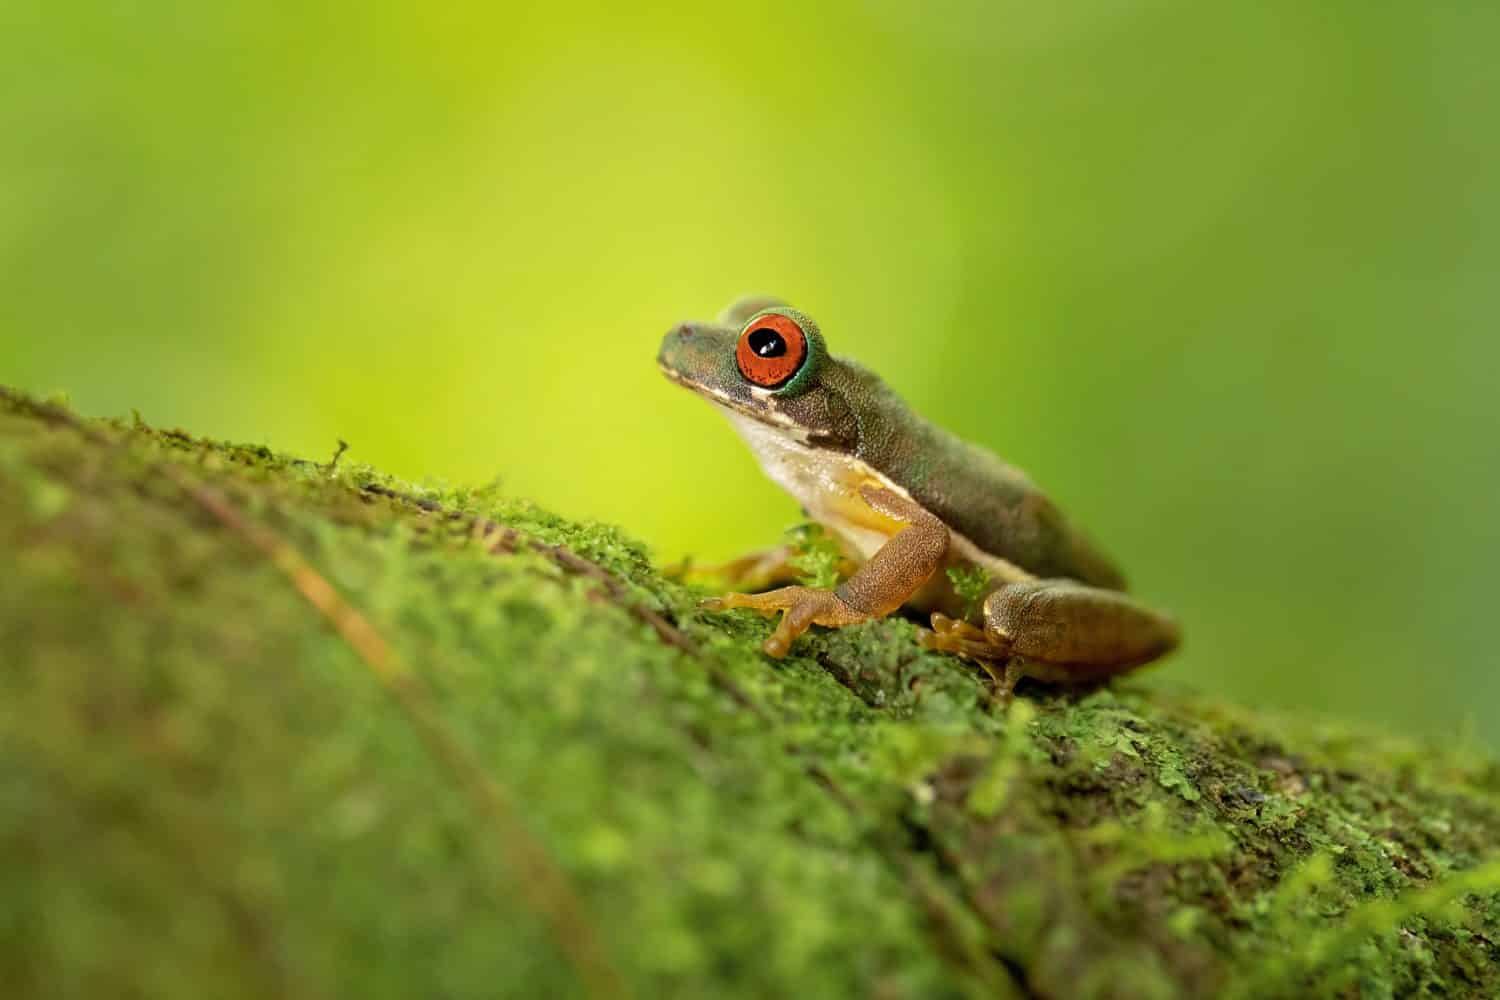 Rufous-eyed brook frog or rufous-eyed stream frog (Duellmanohyla rufioculis), is a species of frog in the family Hylidae.